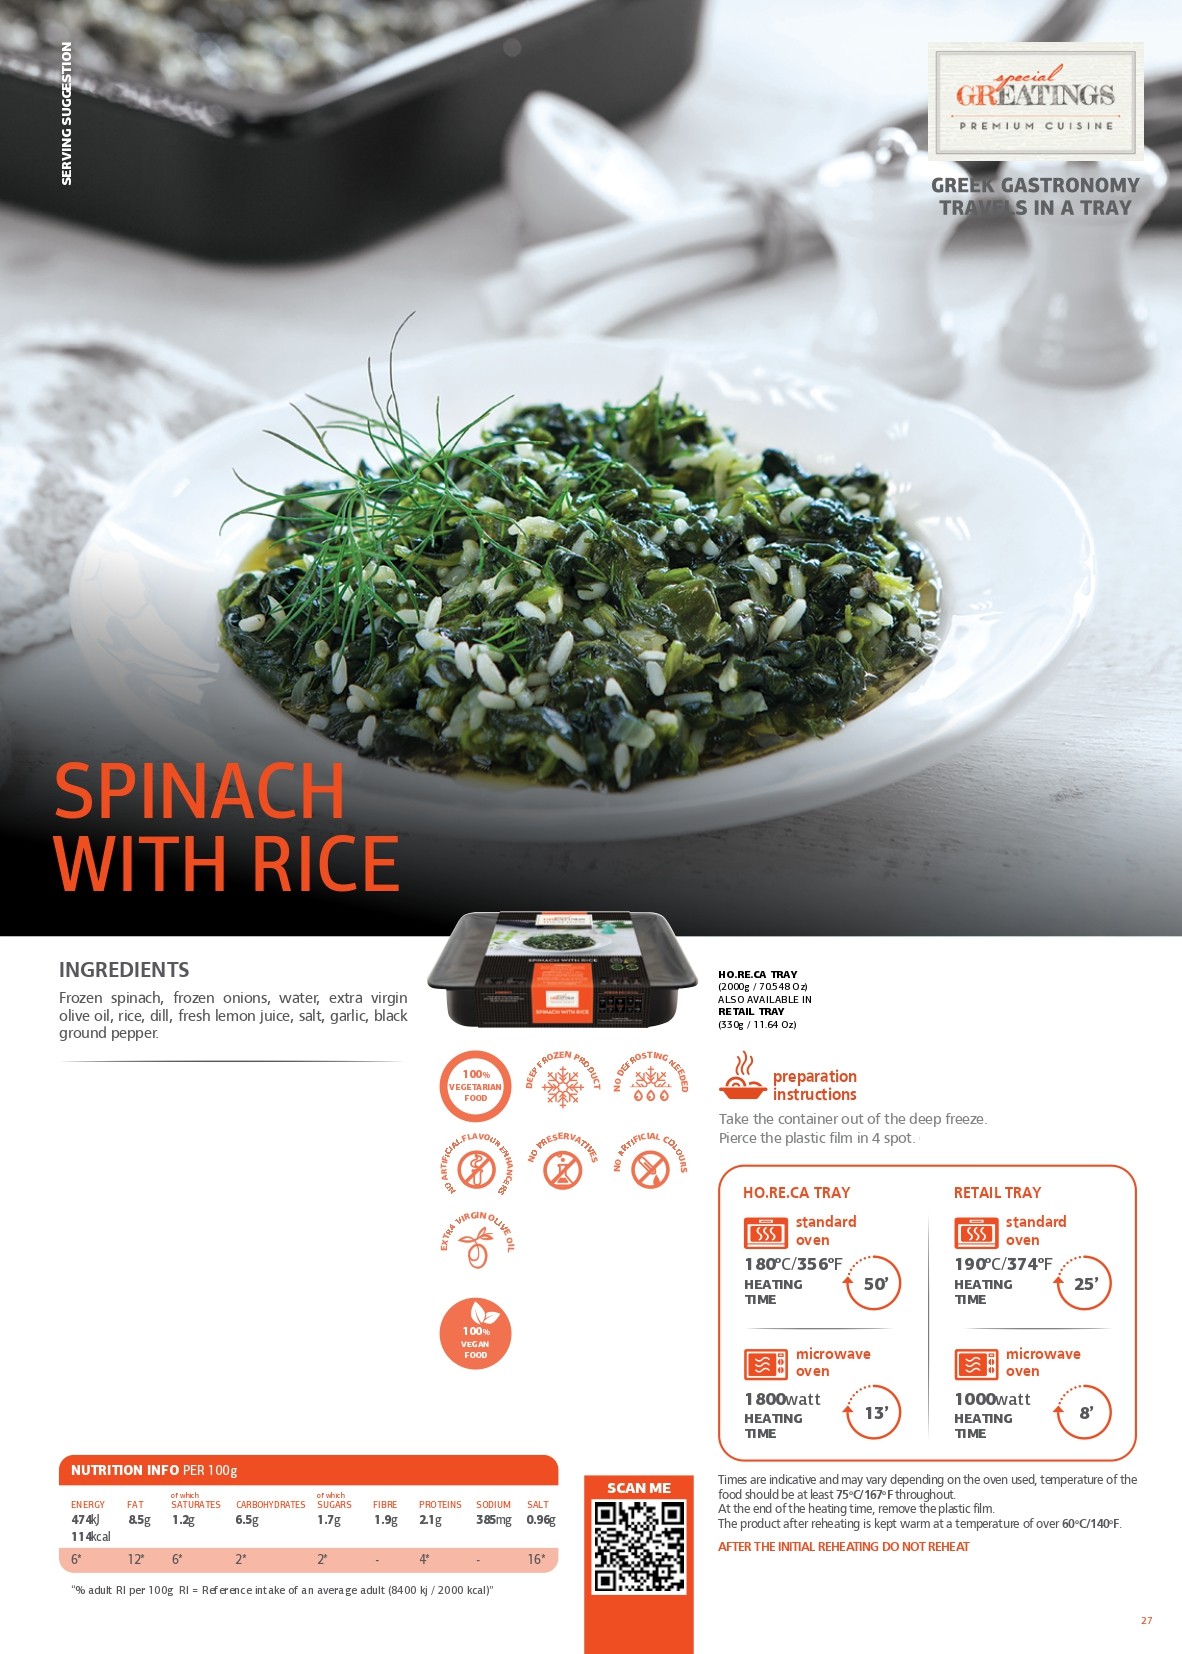 Spinach with rice pdf image